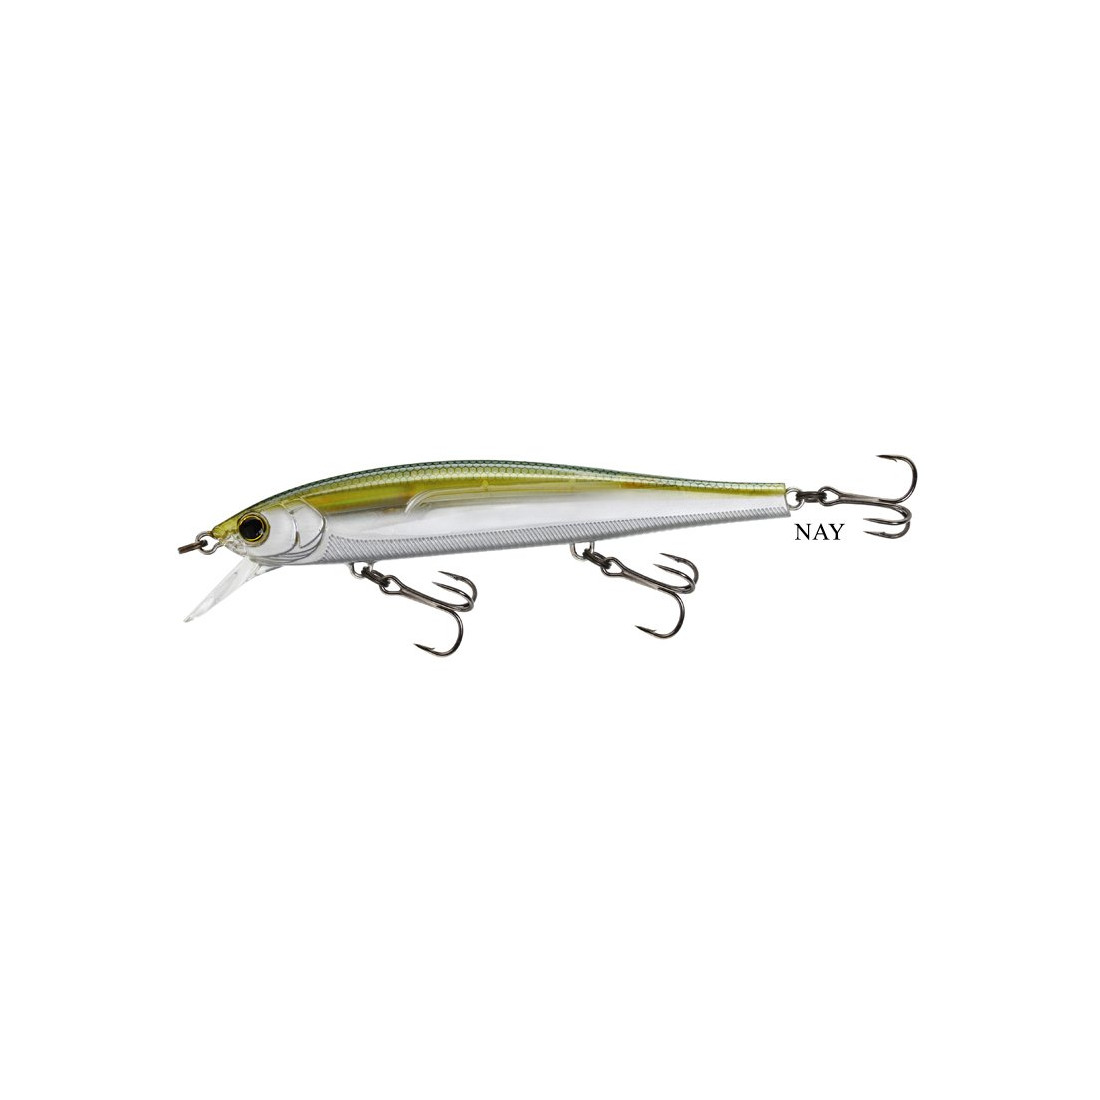 Creative Model Fishing Lure Minnow 140mm/26.5g,Penis Dick Diving Spinner Bass,Penis Swim Funny Rattlewith Hook Fishing,Novelty Fishing Gifts for Fishing Lovers 